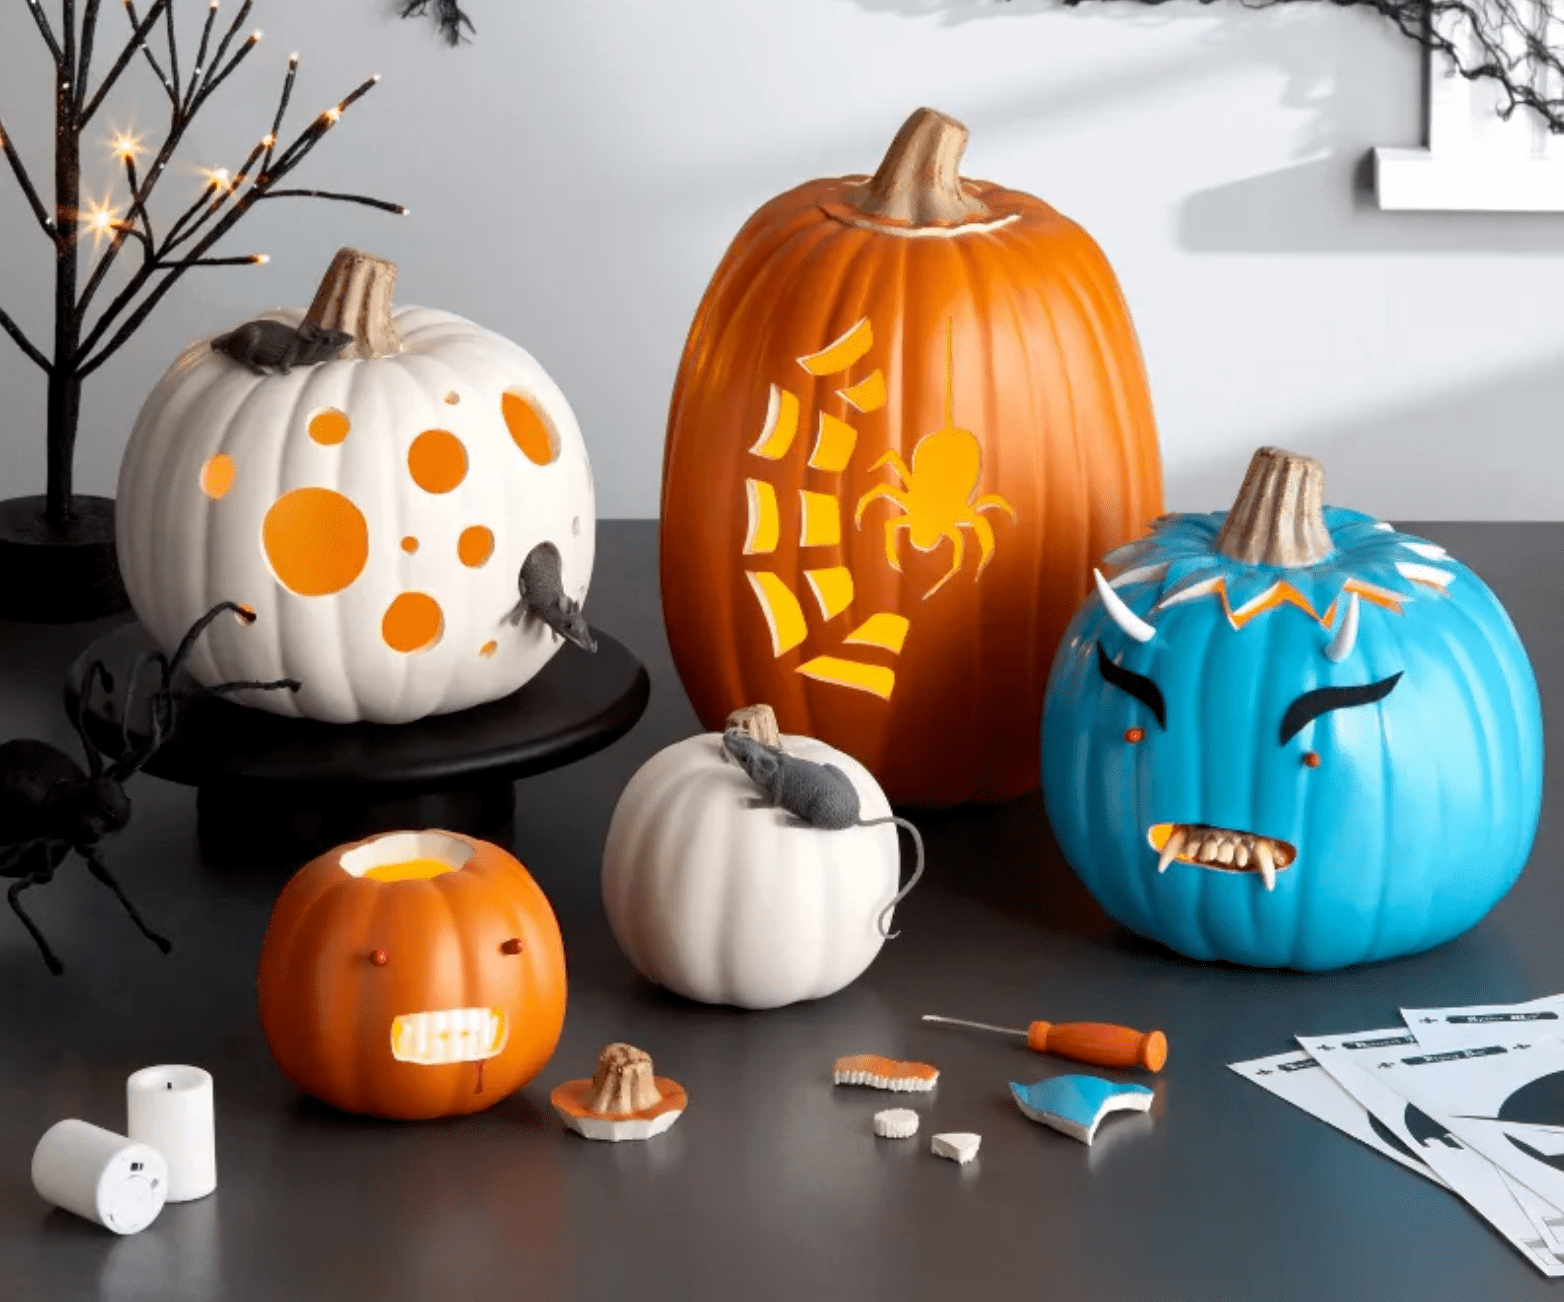 The Best Halloween Decorations Include Teal (Faux) Pumpkins